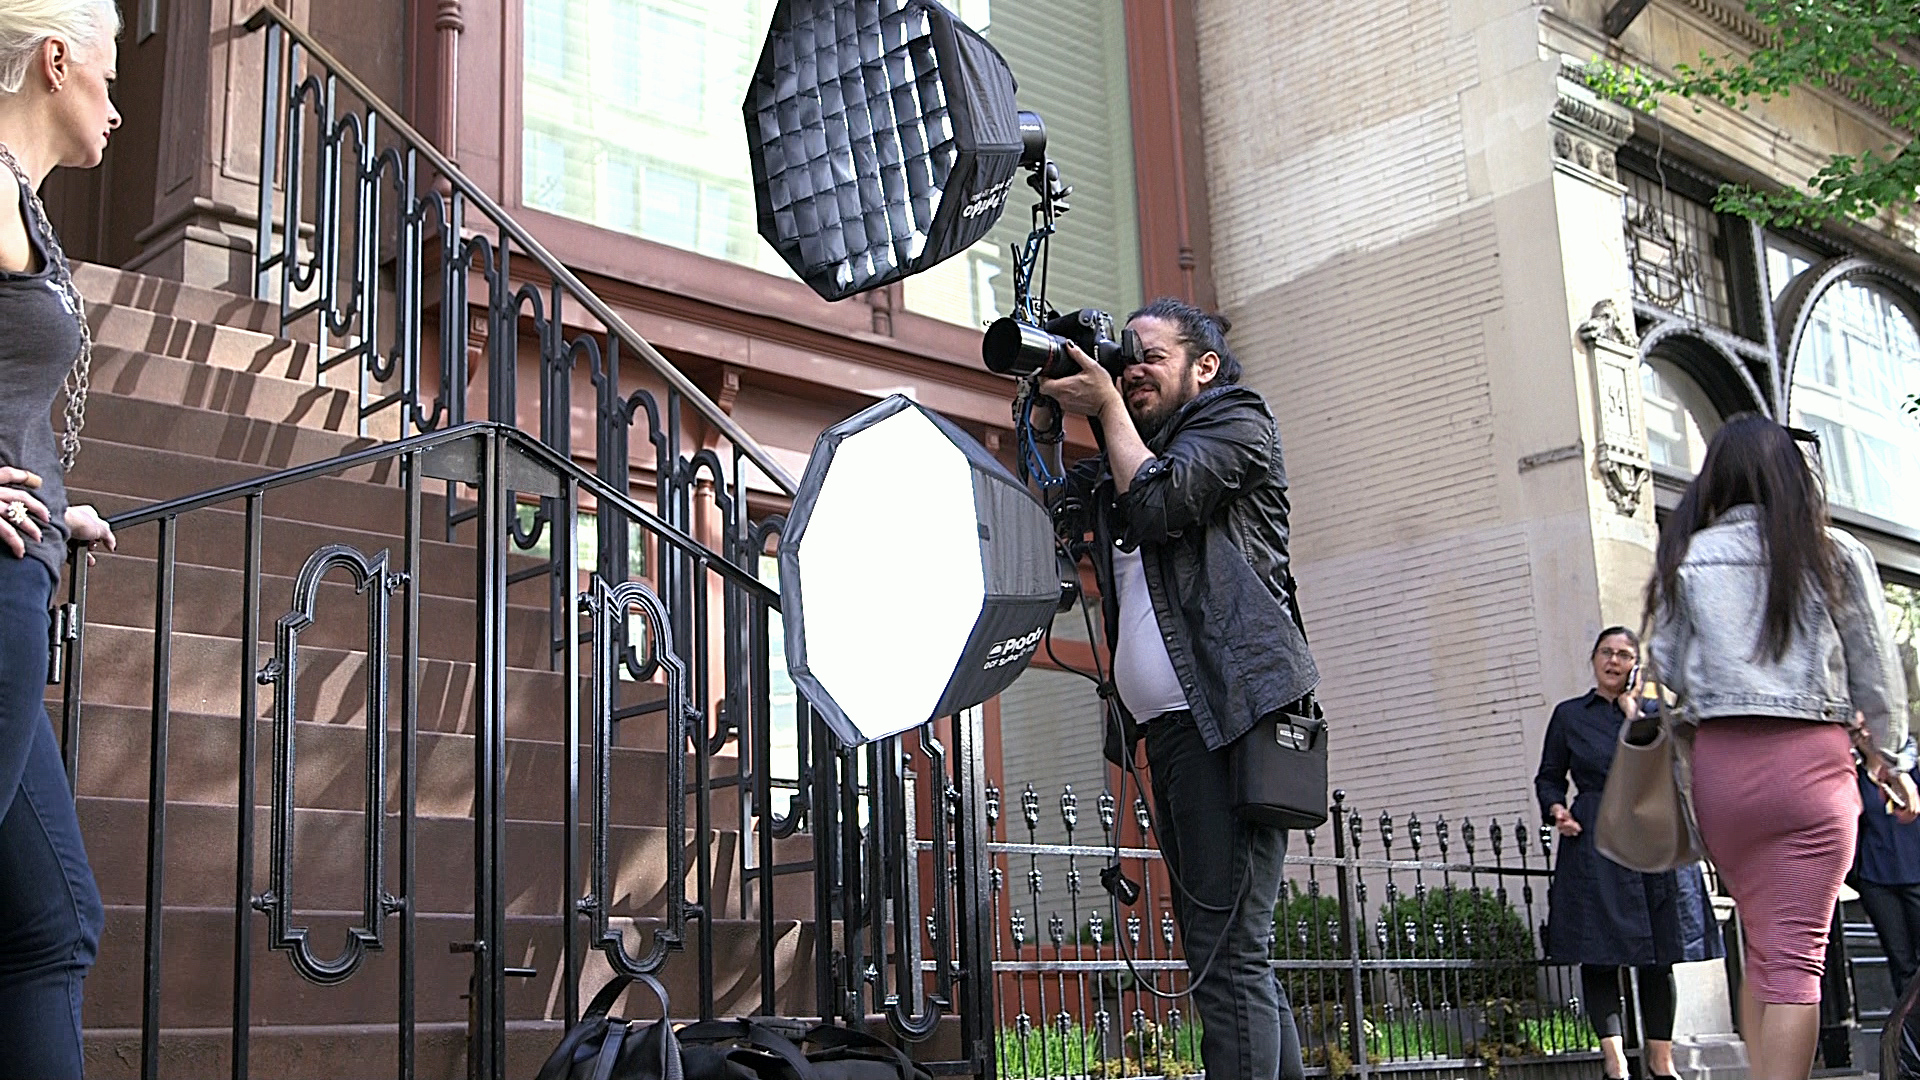 Jason shooting tests on location in NYC, with the custom rig he uses for Six Beats Of Separation photo-shoots.